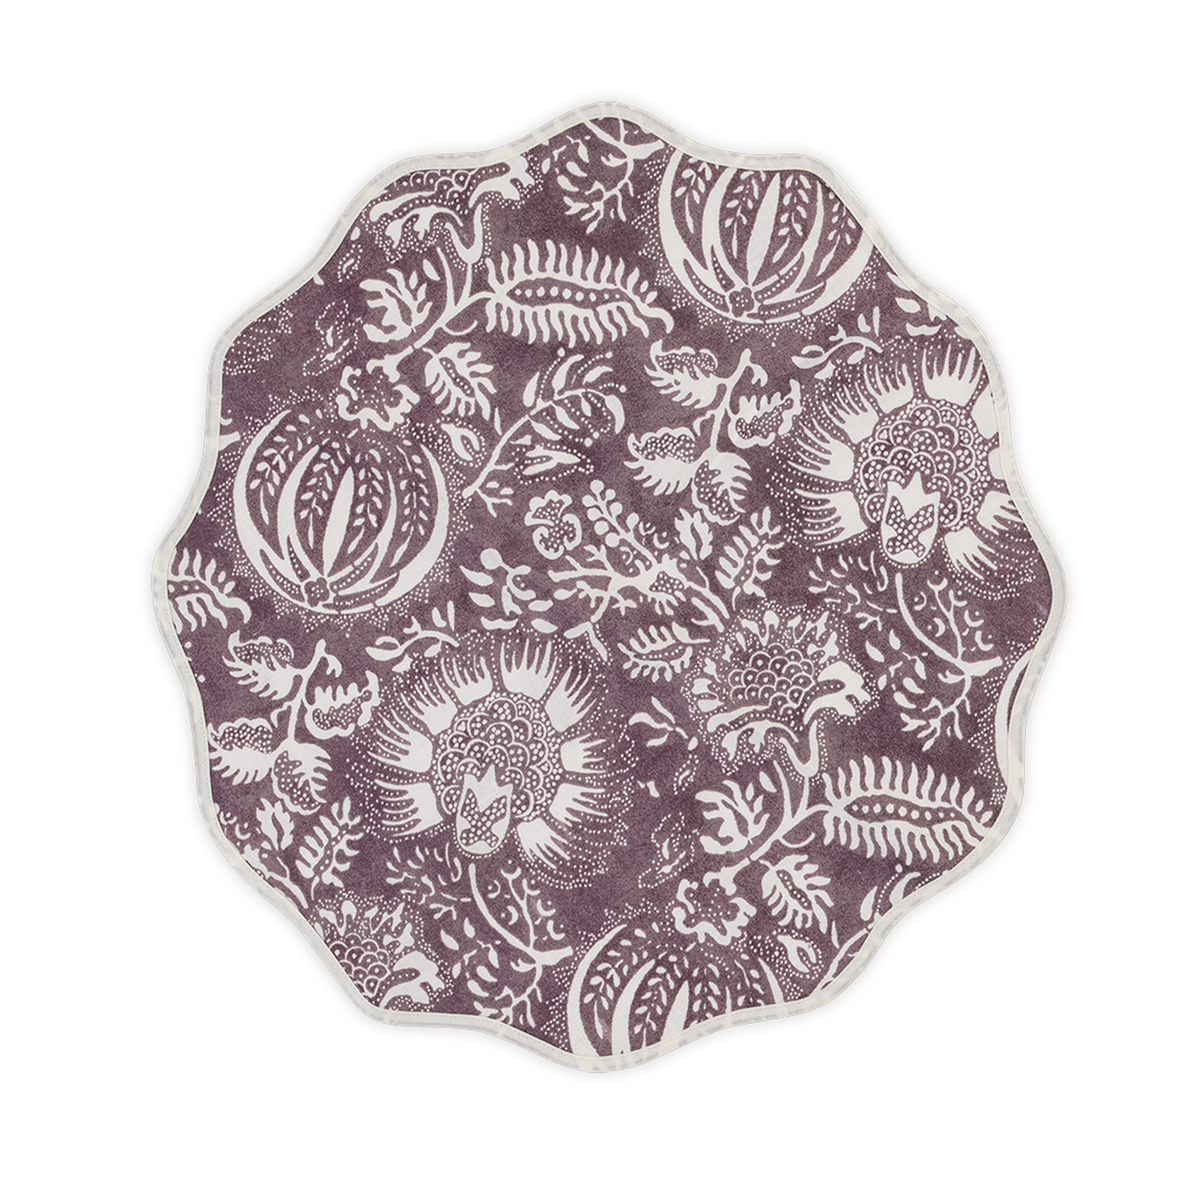 Silo Image of Matouk Granada Table Round Placemat in Thistle Color